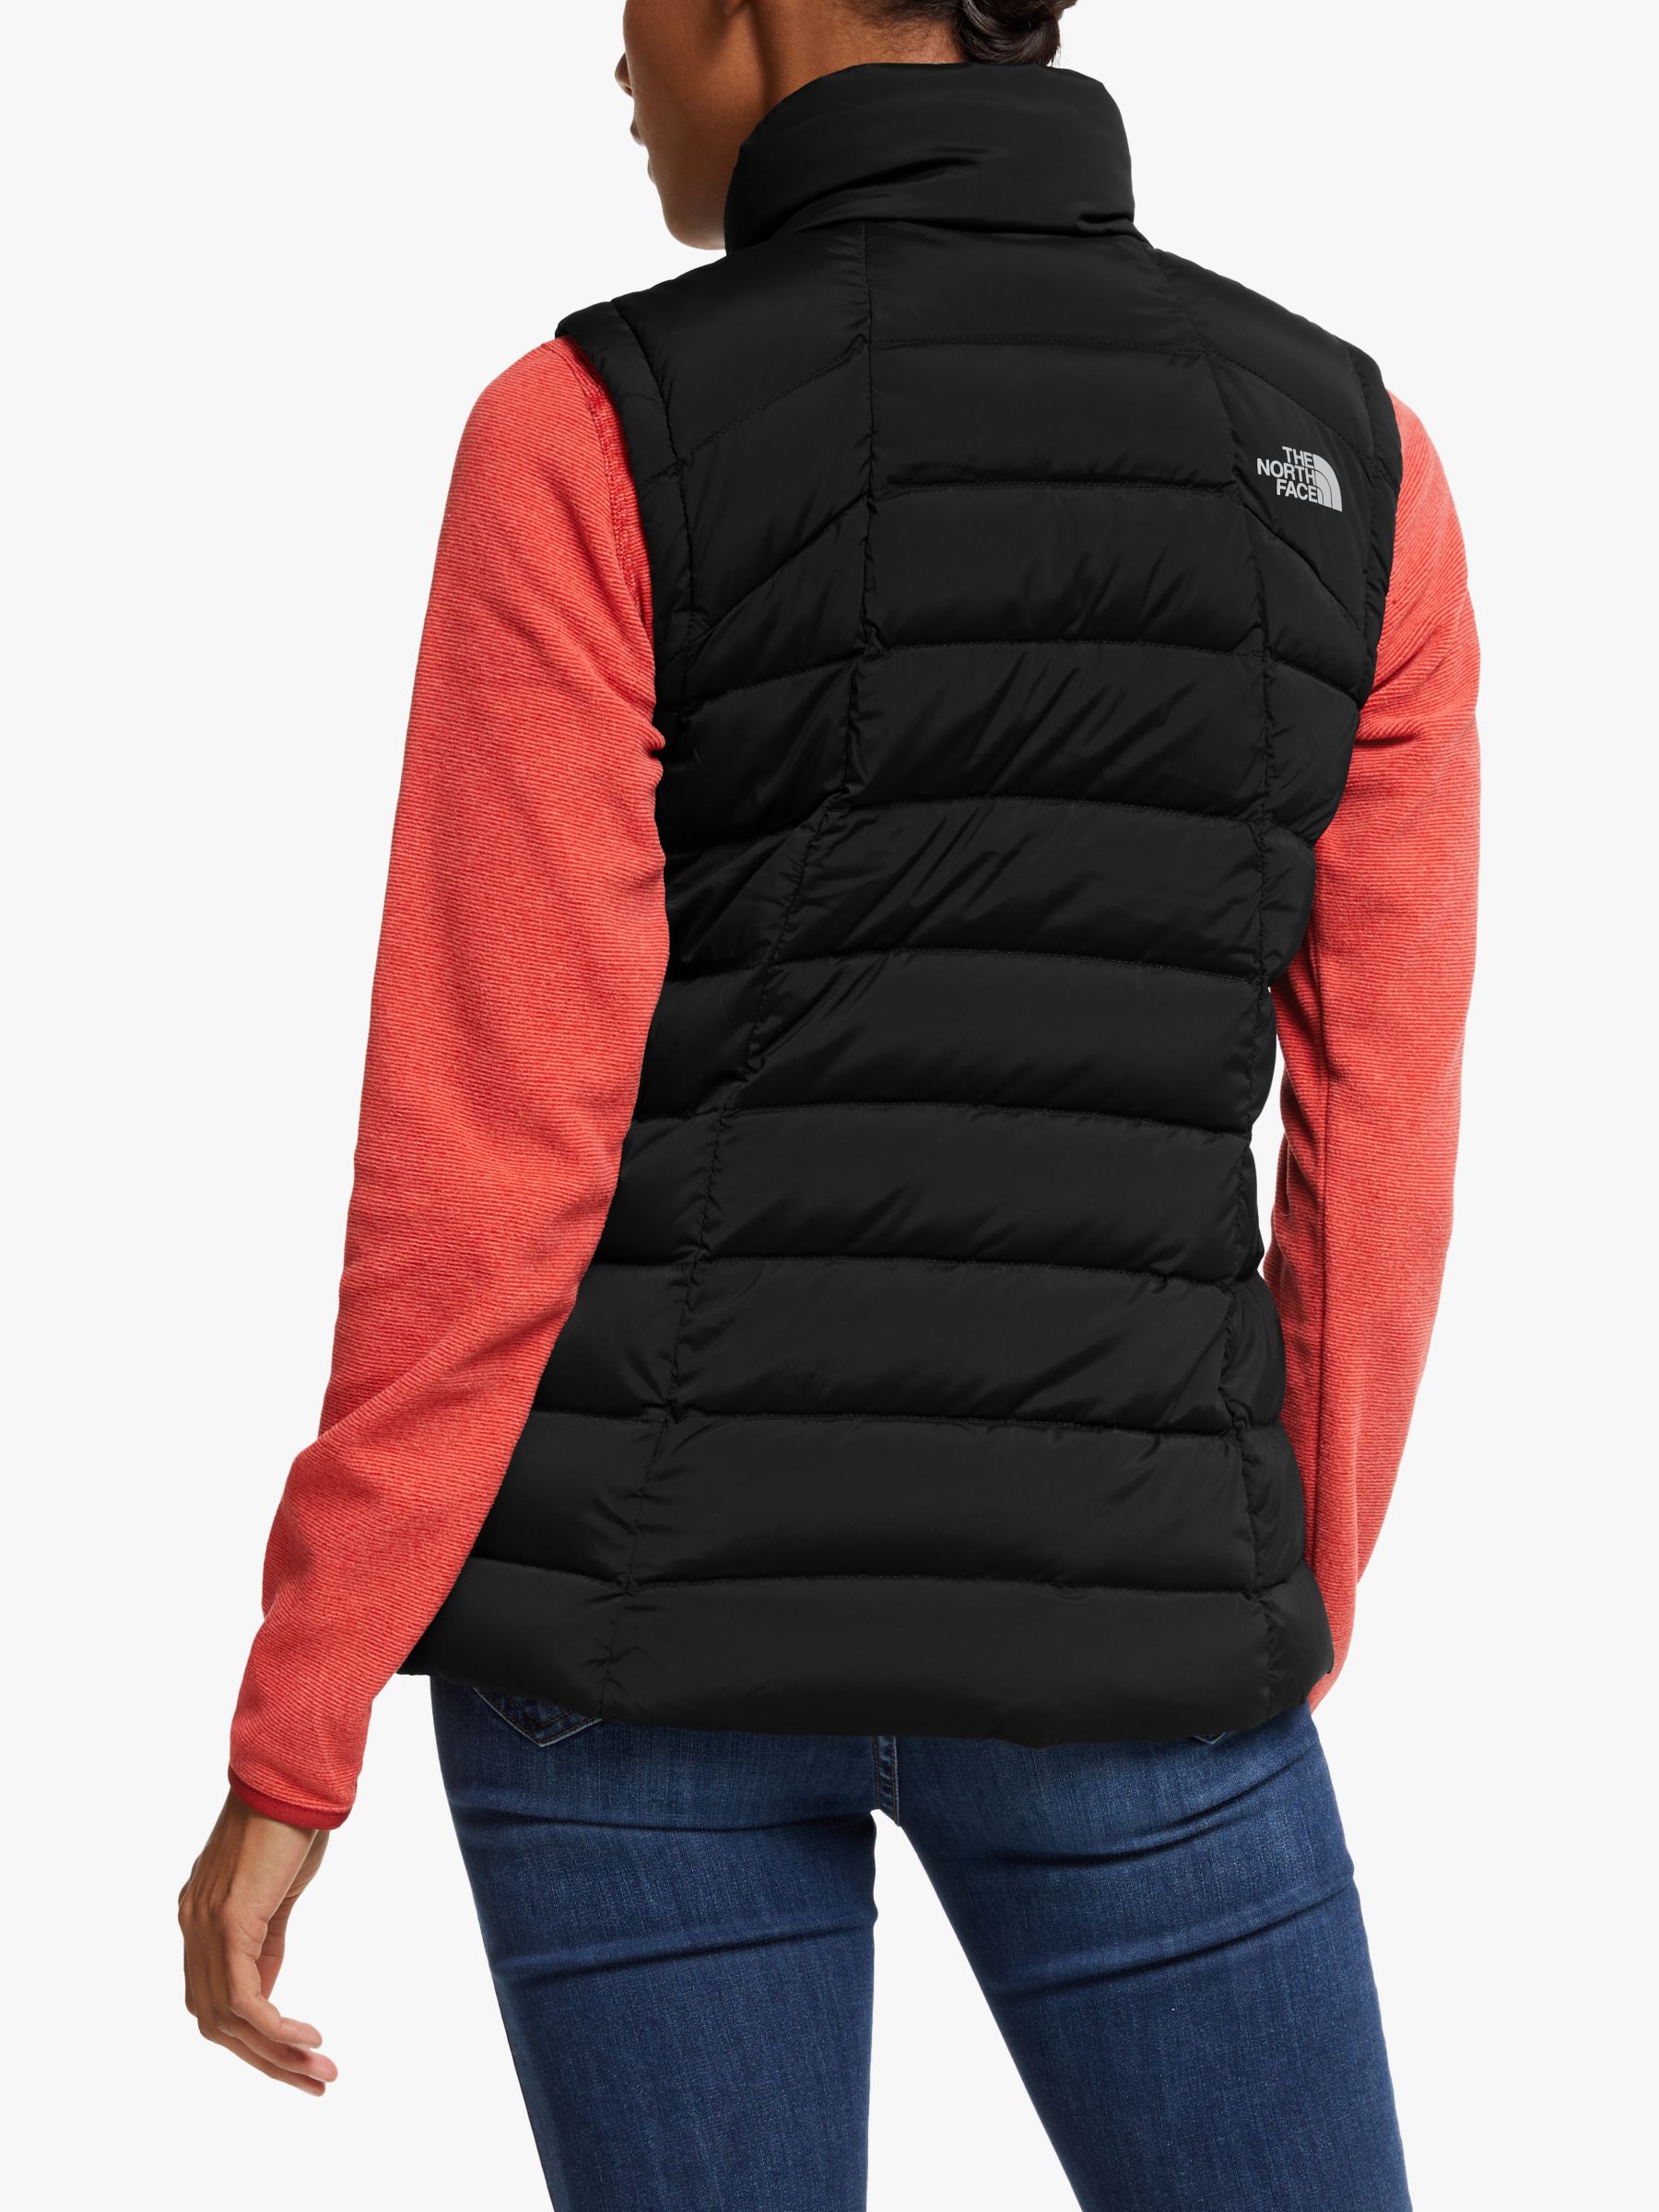 ladies north face body warmer